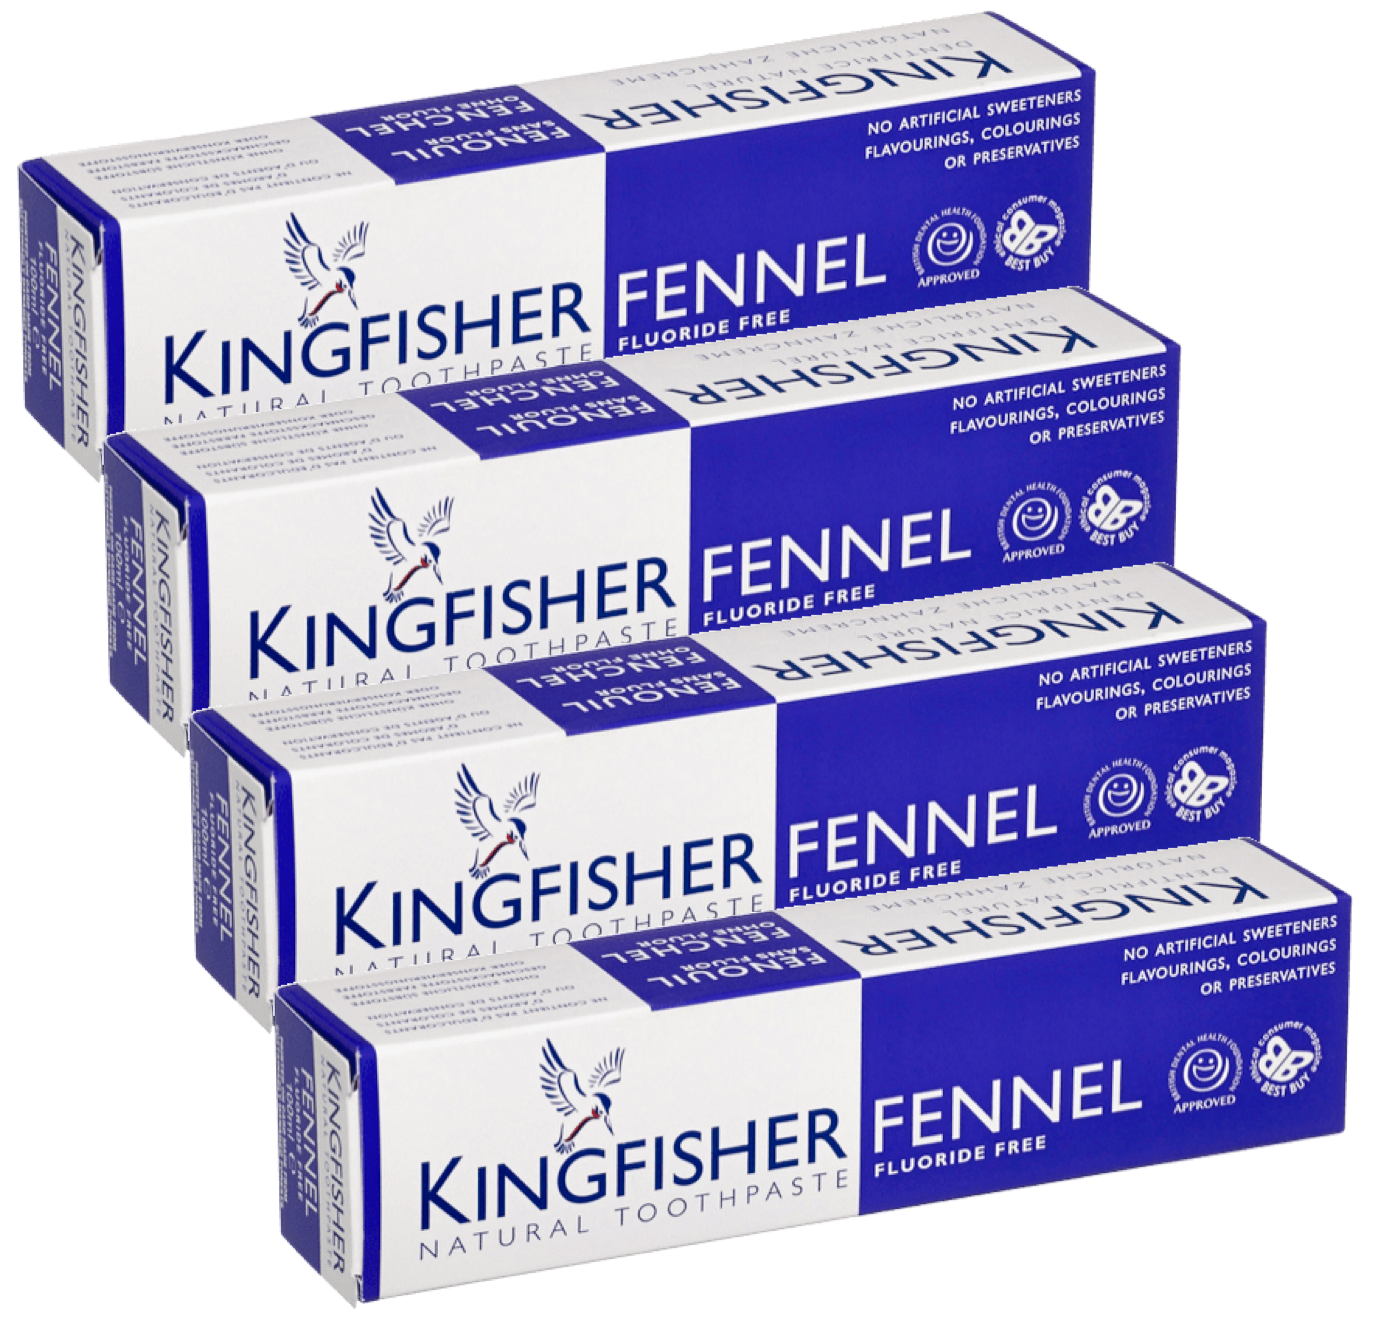 Kingfisher Toothpaste - Fennel Fluoride Free Toothpaste (100ml) - Pack of 4